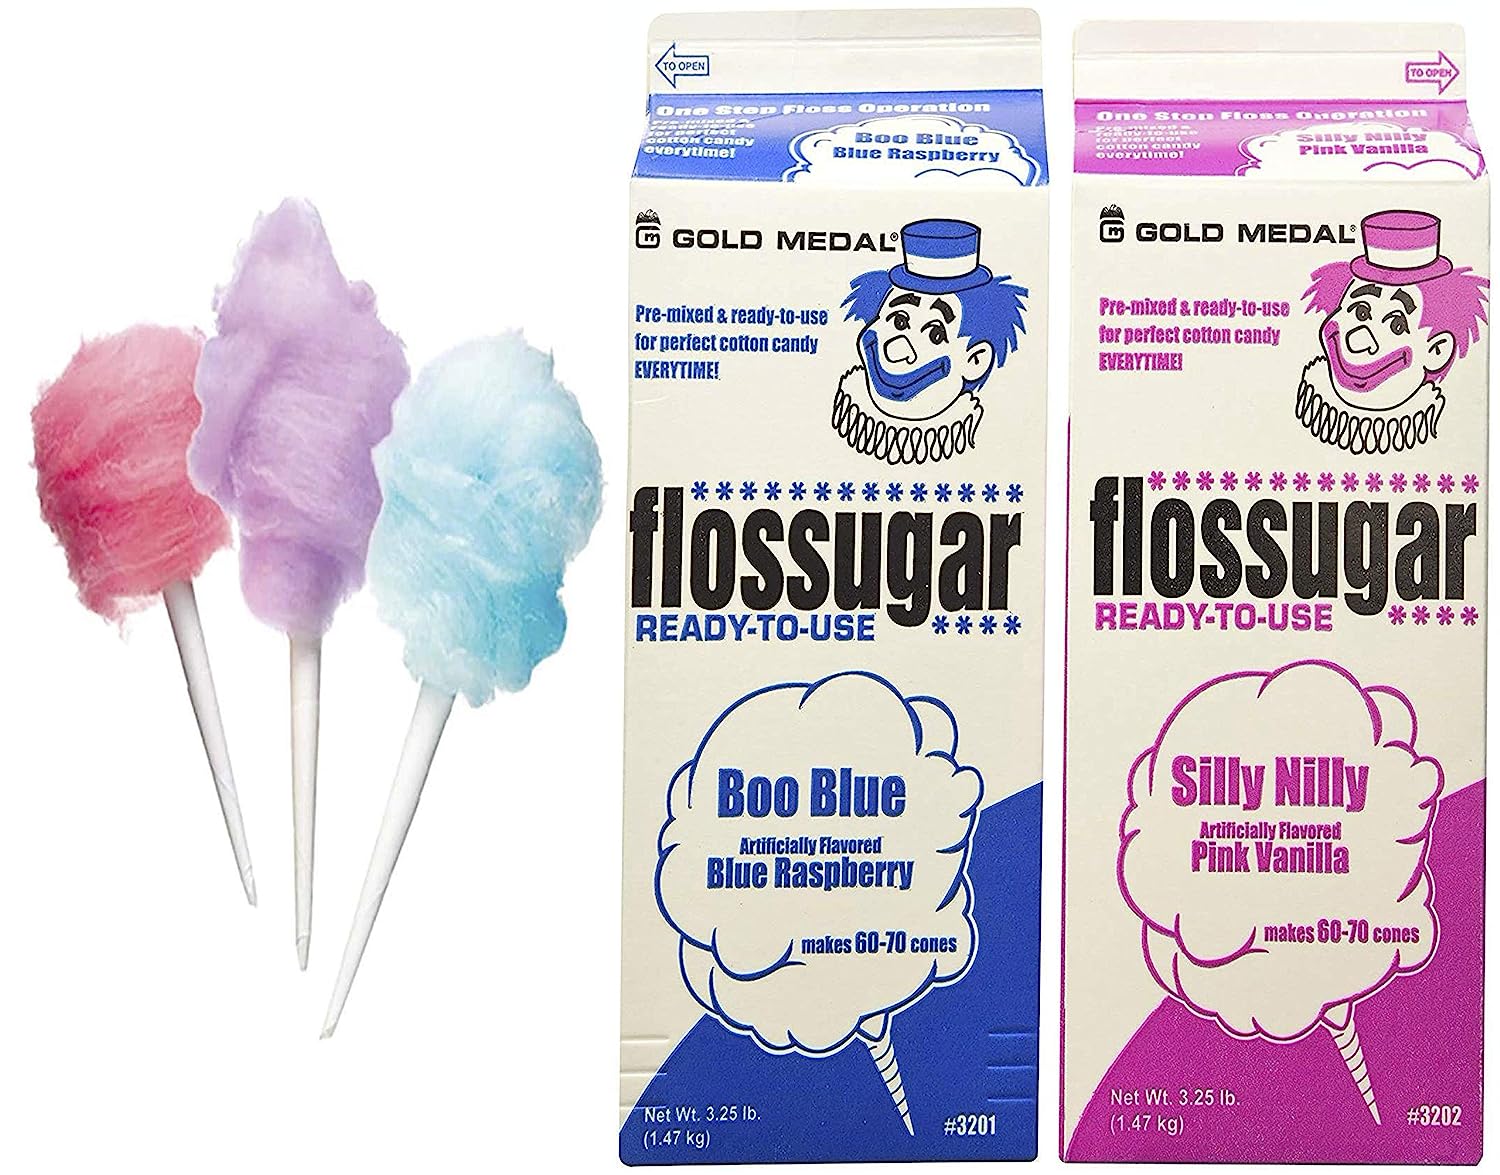 2 Pack Cotton Candy Floss Sugar. Pink Vanilla and Blue Raspberry. (Two 3.25 lb Containers w/100 Cotton Candy Cones)